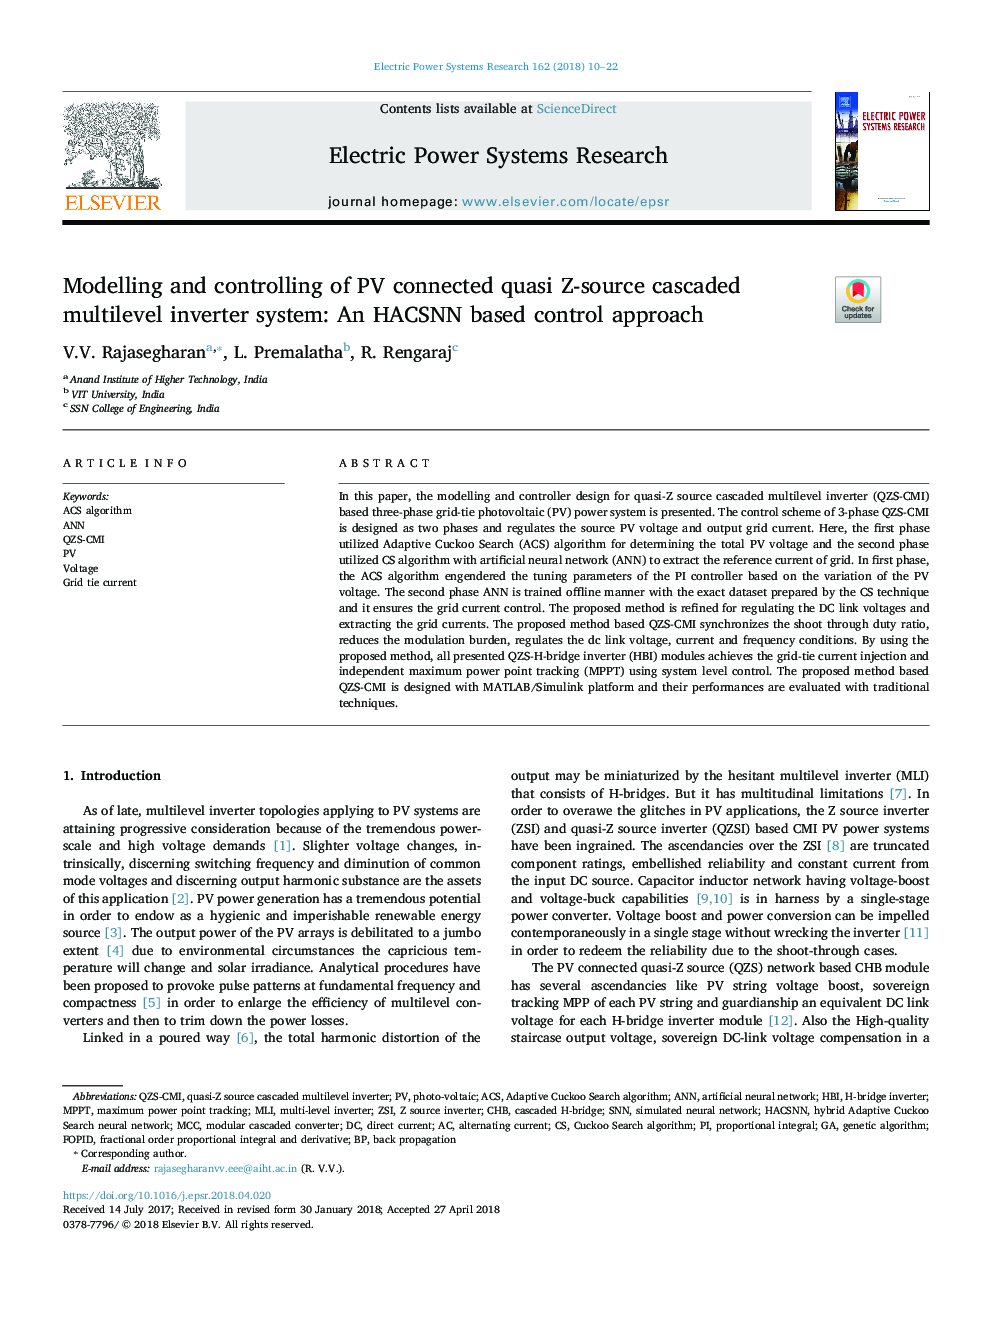 Modelling and controlling of PV connected quasi Z-source cascaded multilevel inverter system: An HACSNN based control approach